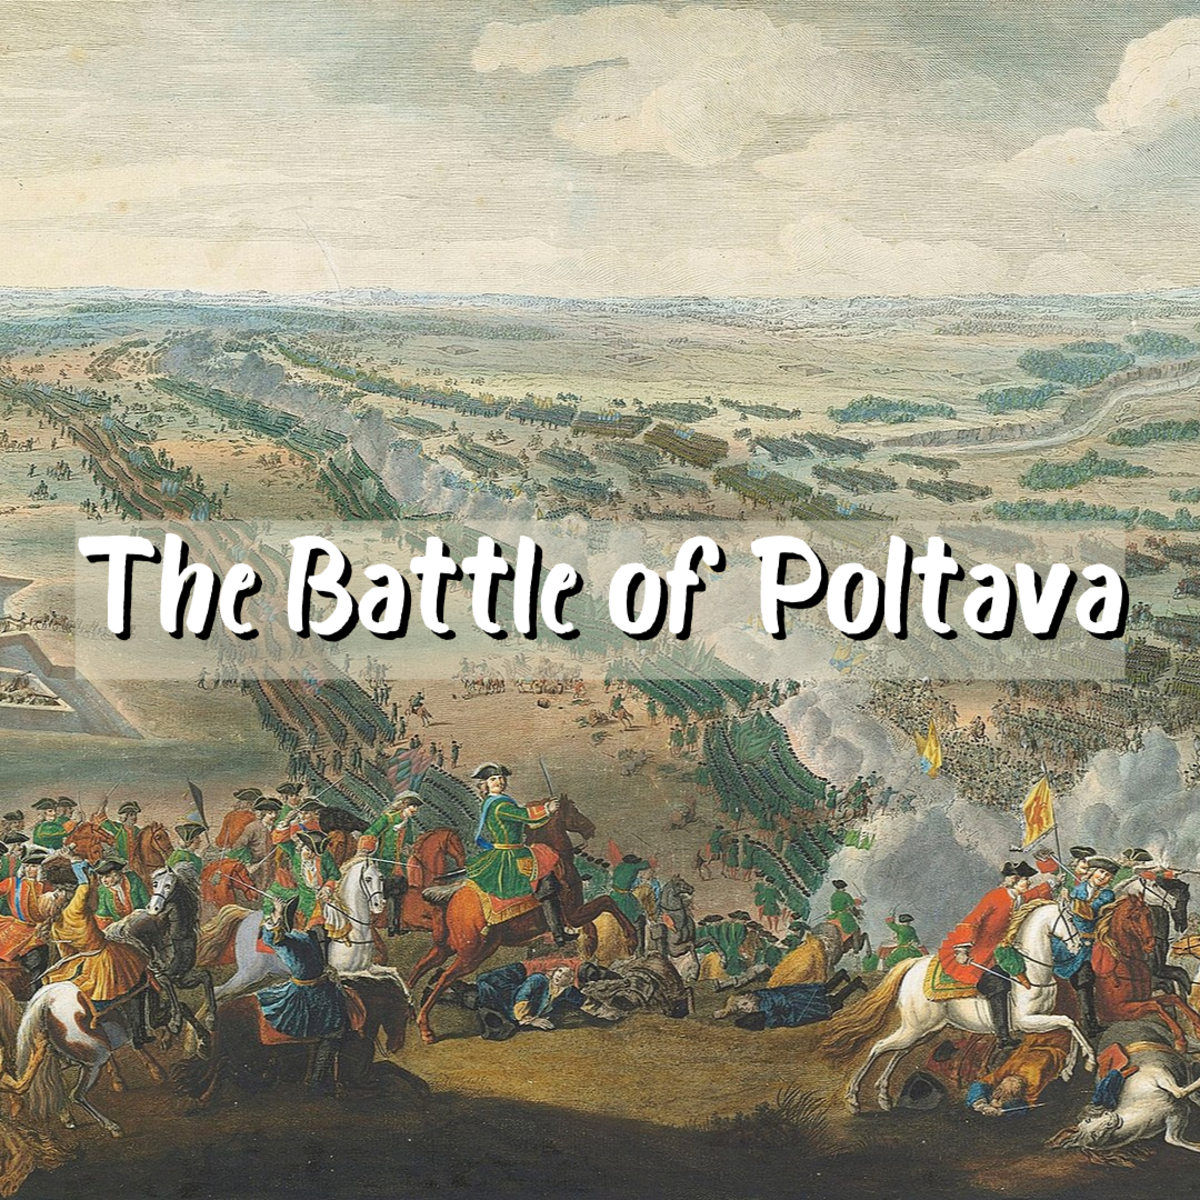 Read on to learn about the Battle of Poltava, a decisive battle in Sweden's military history which led to the fall of Sweden as a superpower.